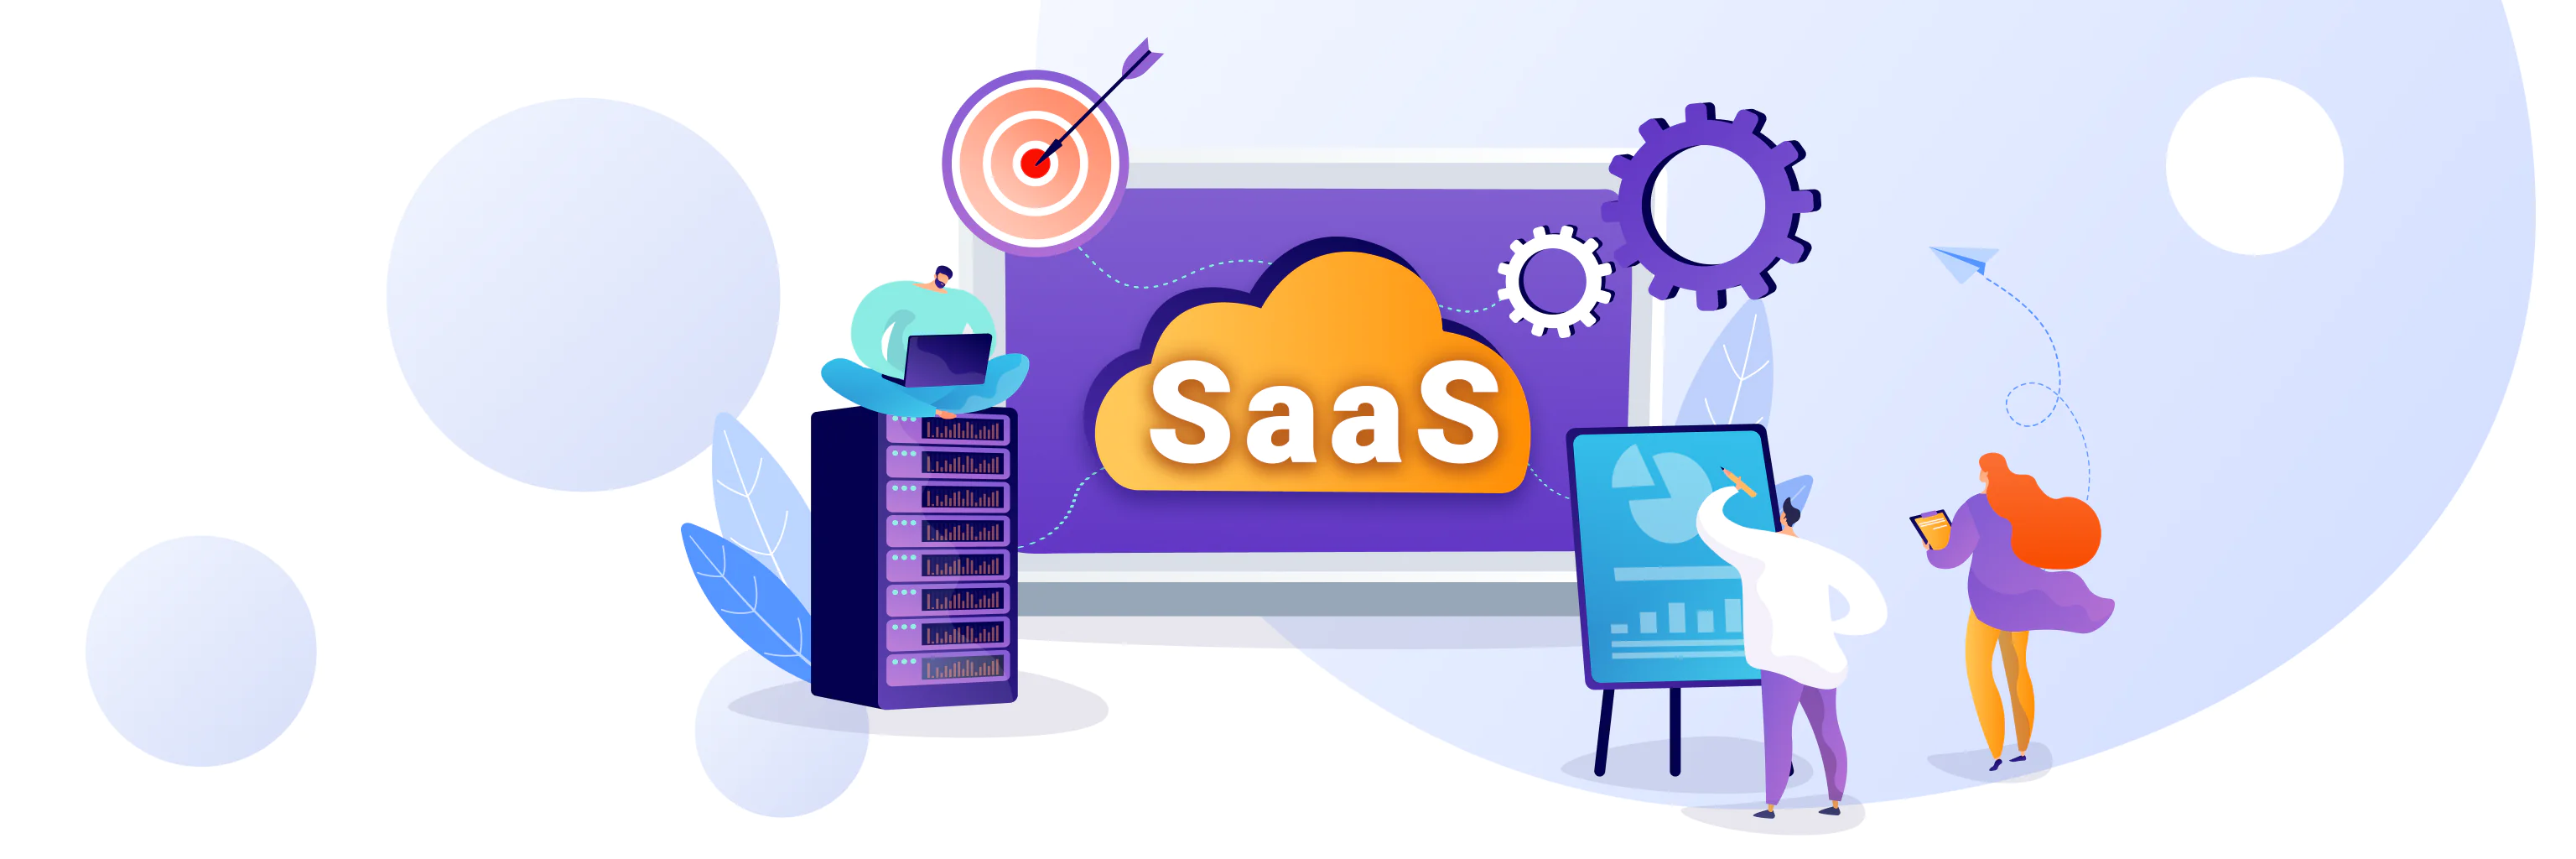 SaaS development services offering great opportunities for business